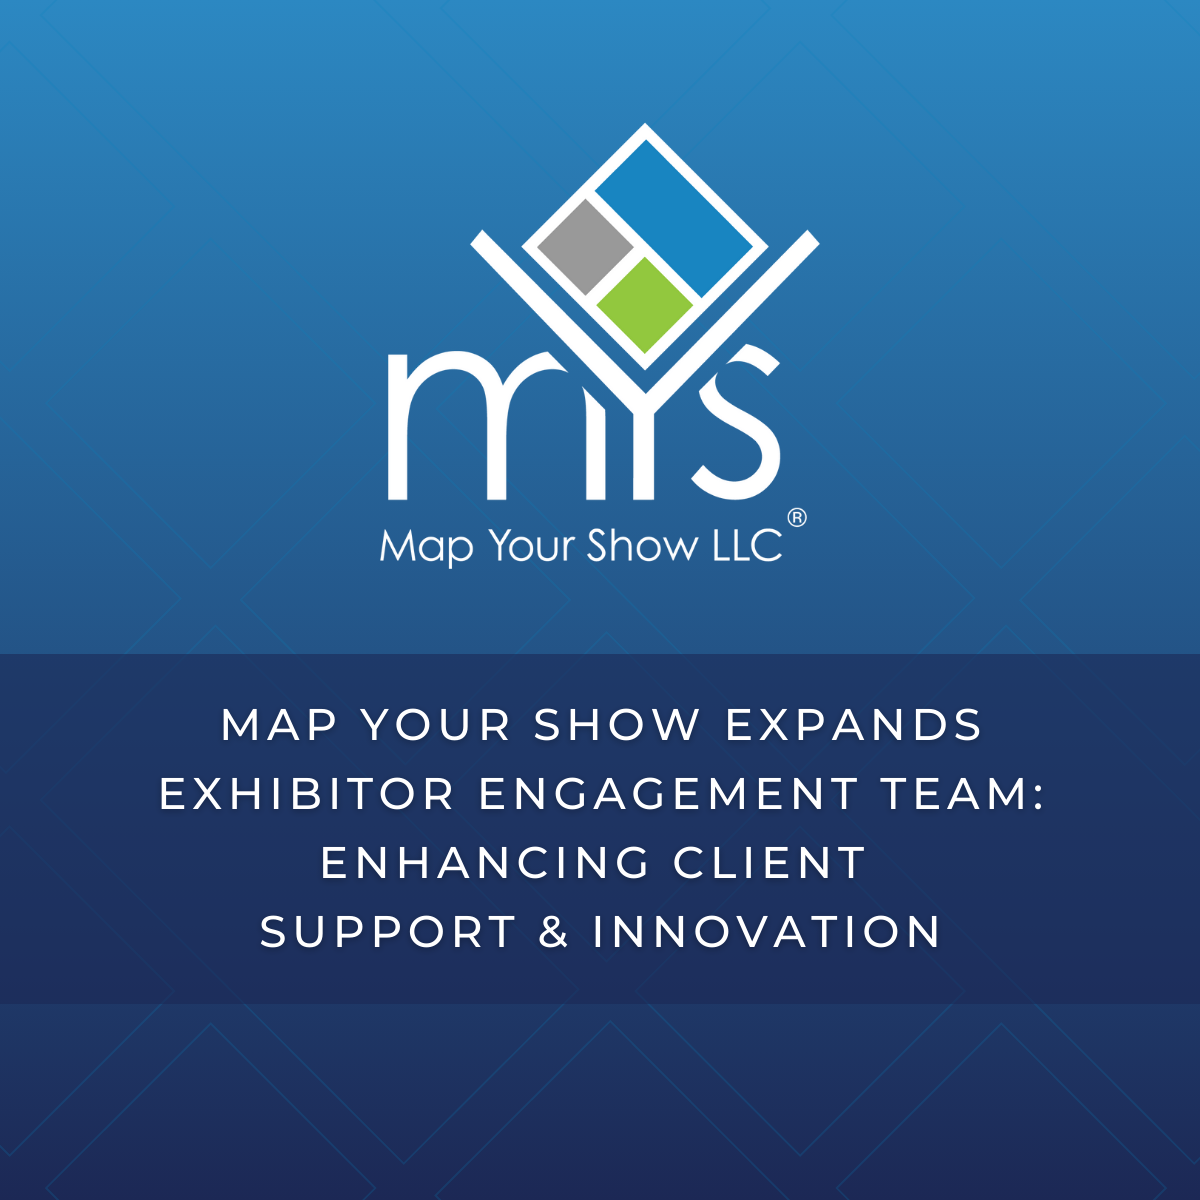 Map Your Show Expands Exhibitor Engagement Team to Enhance Client Support and Innovation